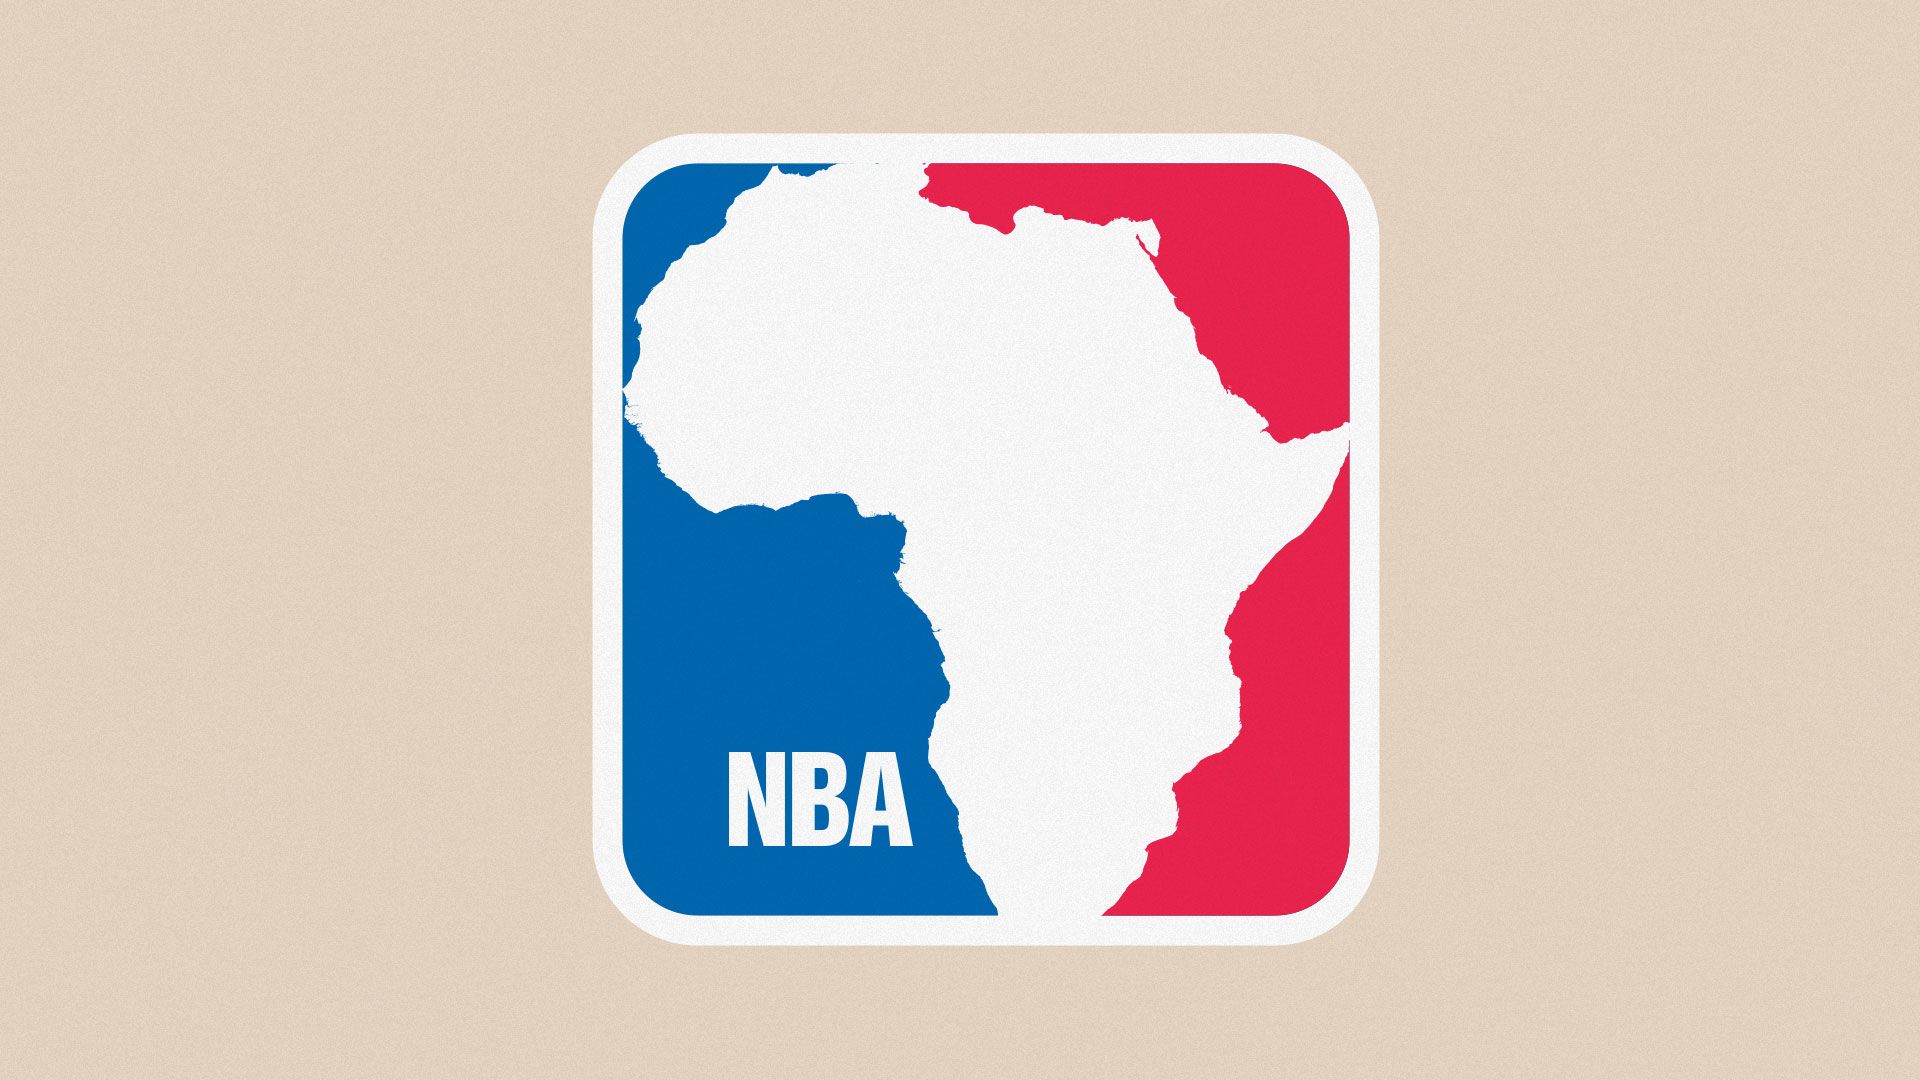 Illustration of NBA logo with person replaced with outline of Africa